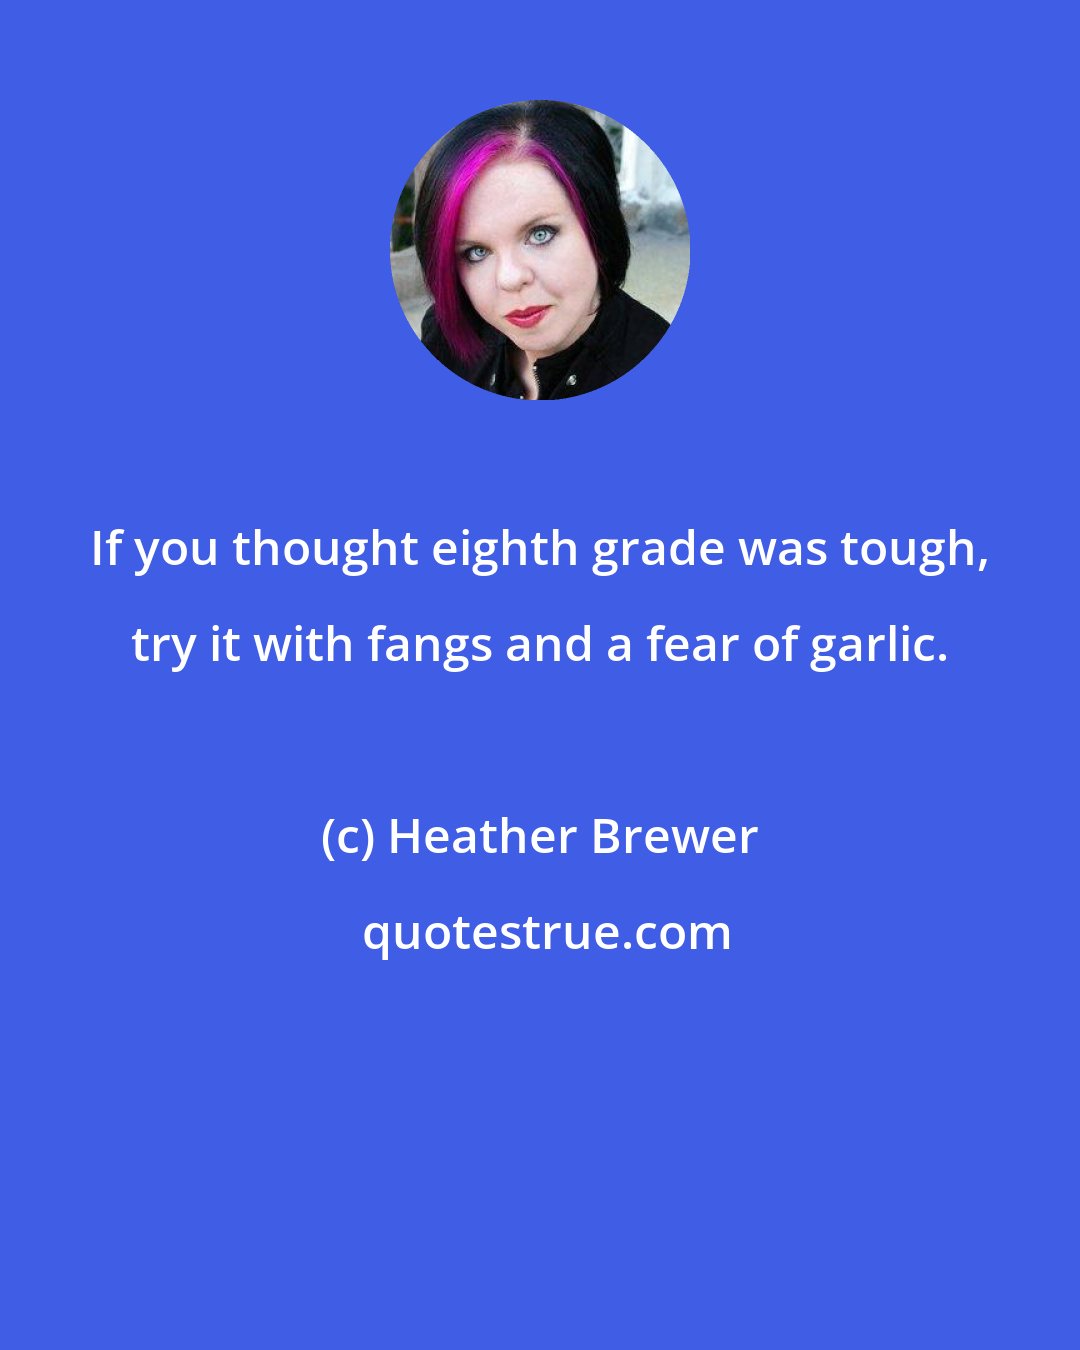 Heather Brewer: If you thought eighth grade was tough, try it with fangs and a fear of garlic.